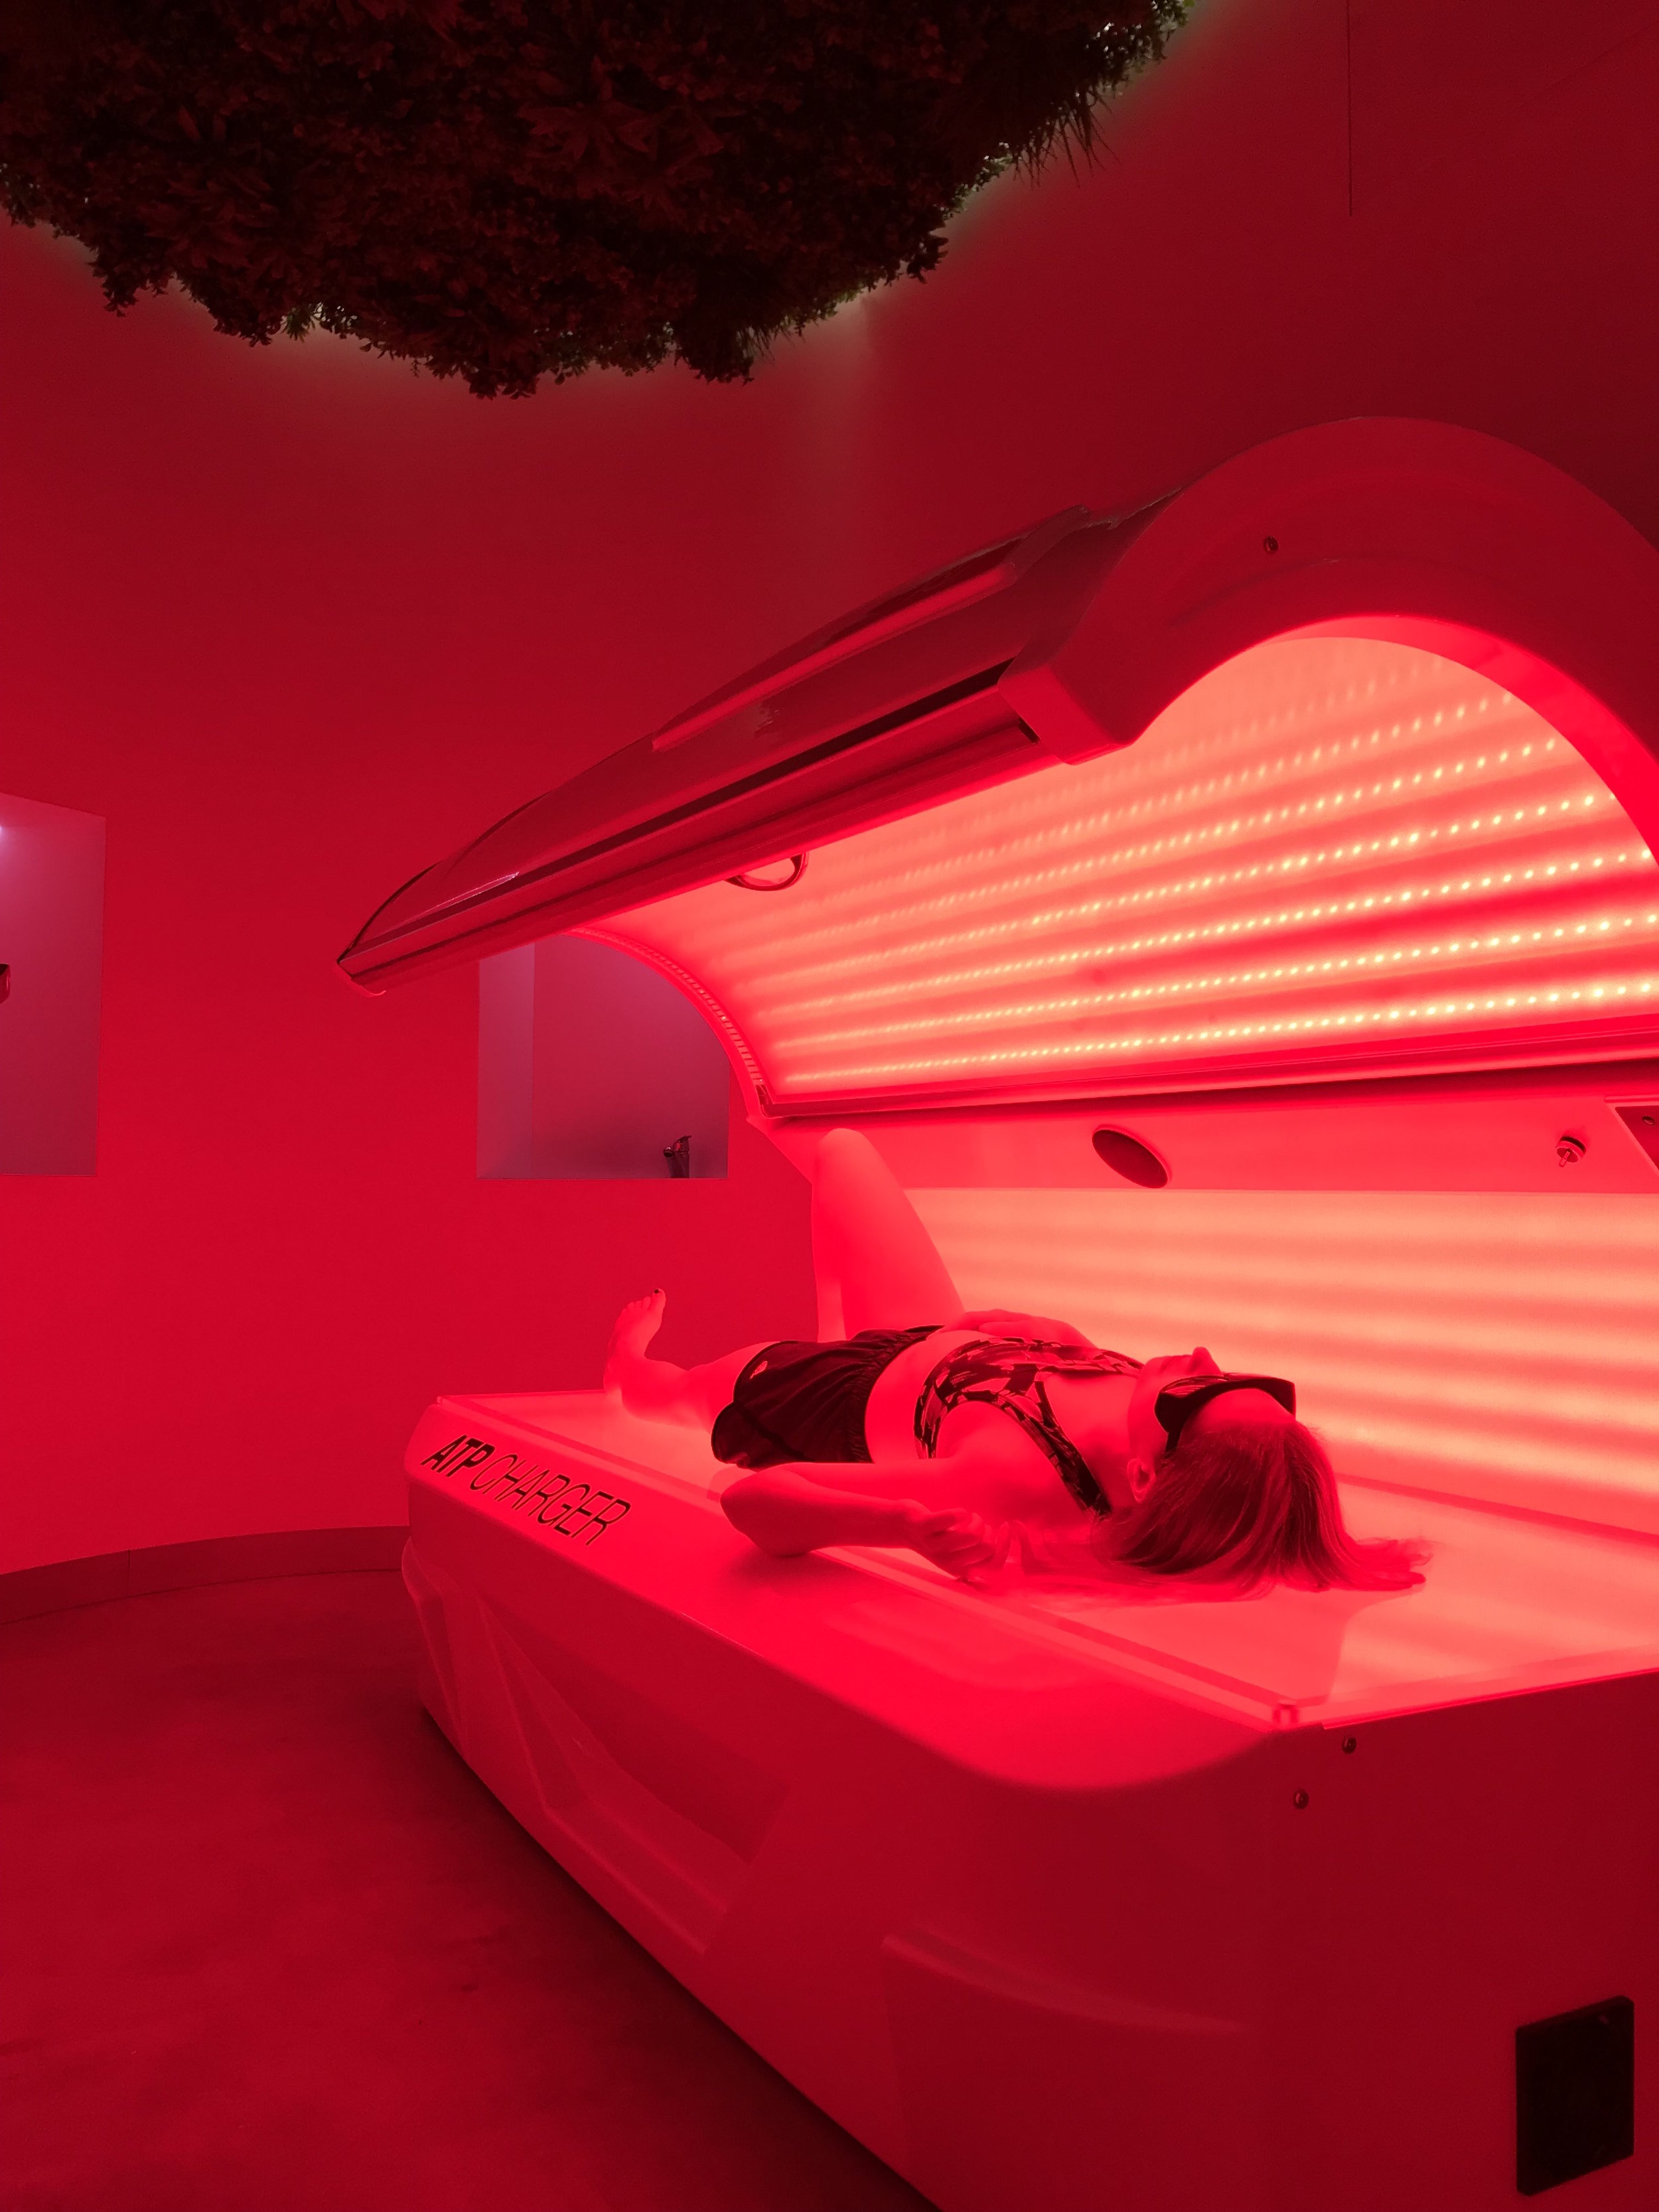 What Is Red Light Therapy At Tanning Salons